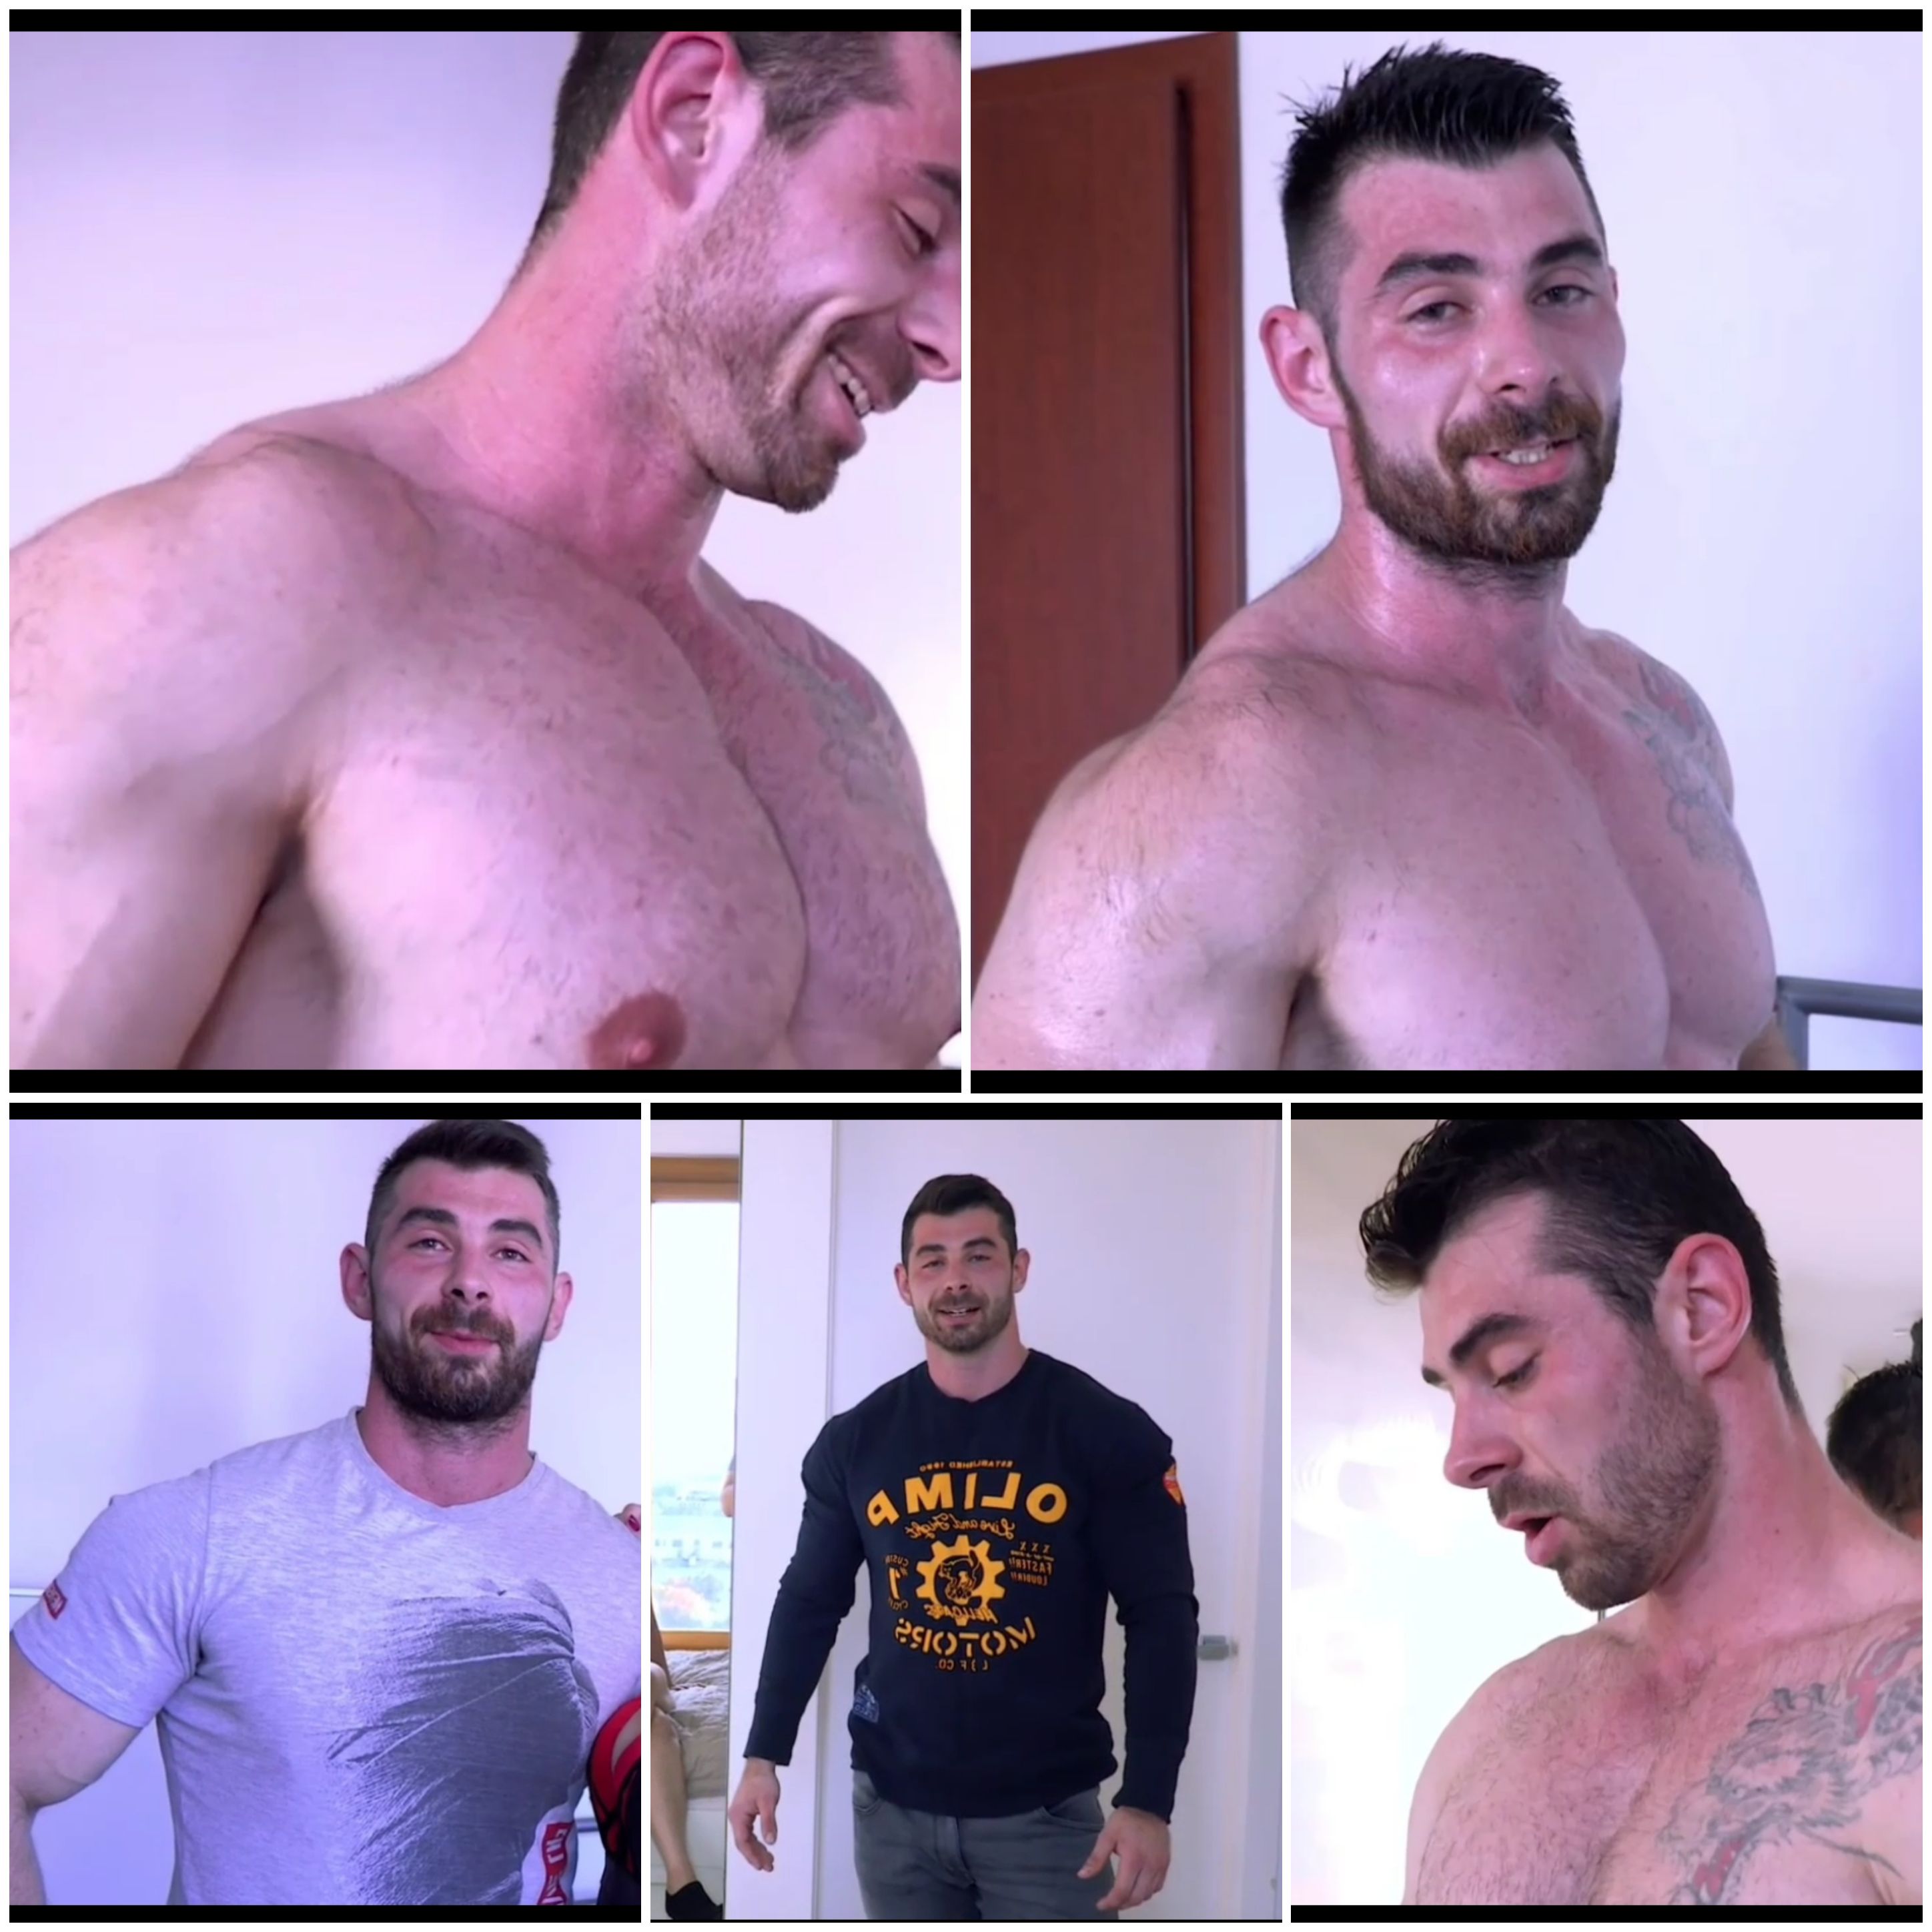 Teaser 4 Straight muscle daddy